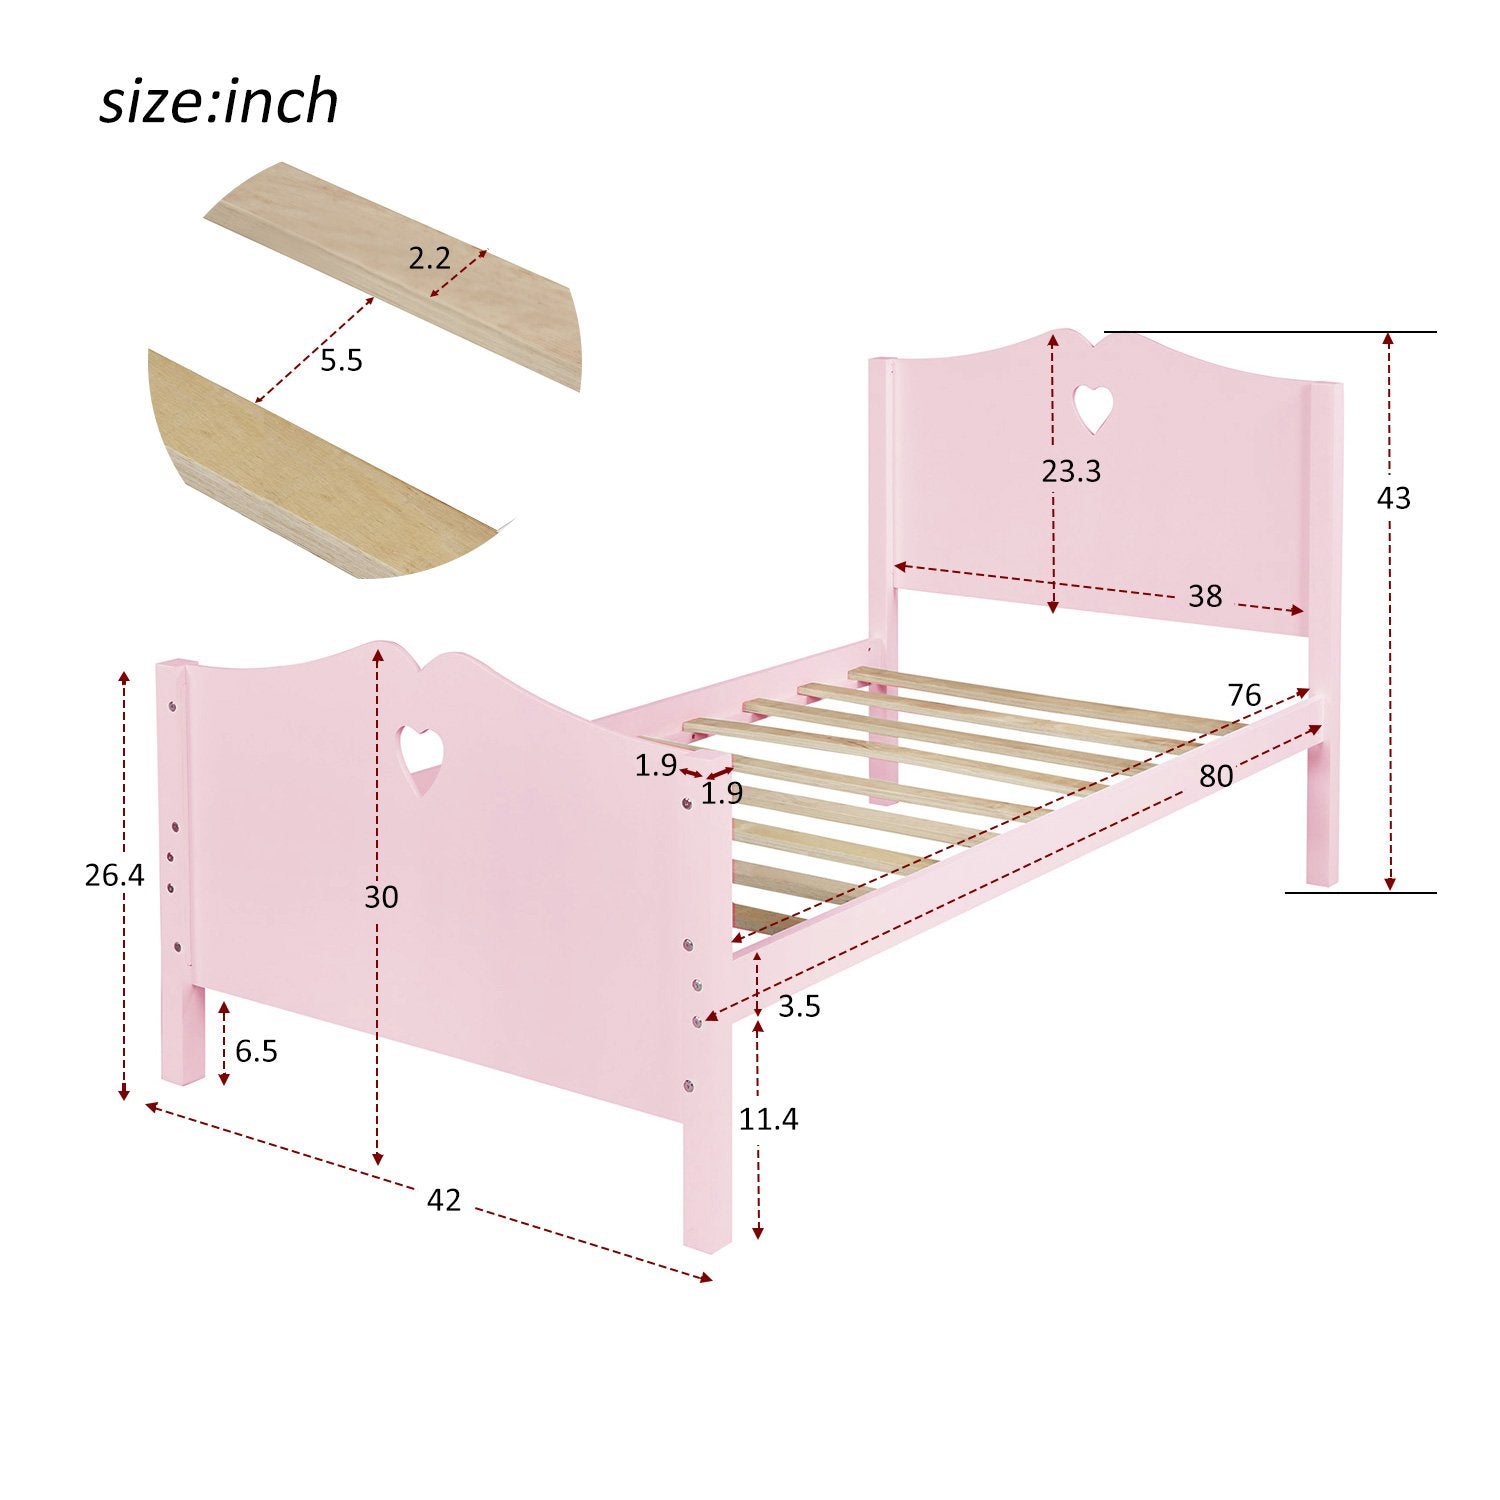 Twin Pink Wood Princess Style Platform Bed with Heart Detail to Headboard and Footboard-Platform Bed-HomeDaybed